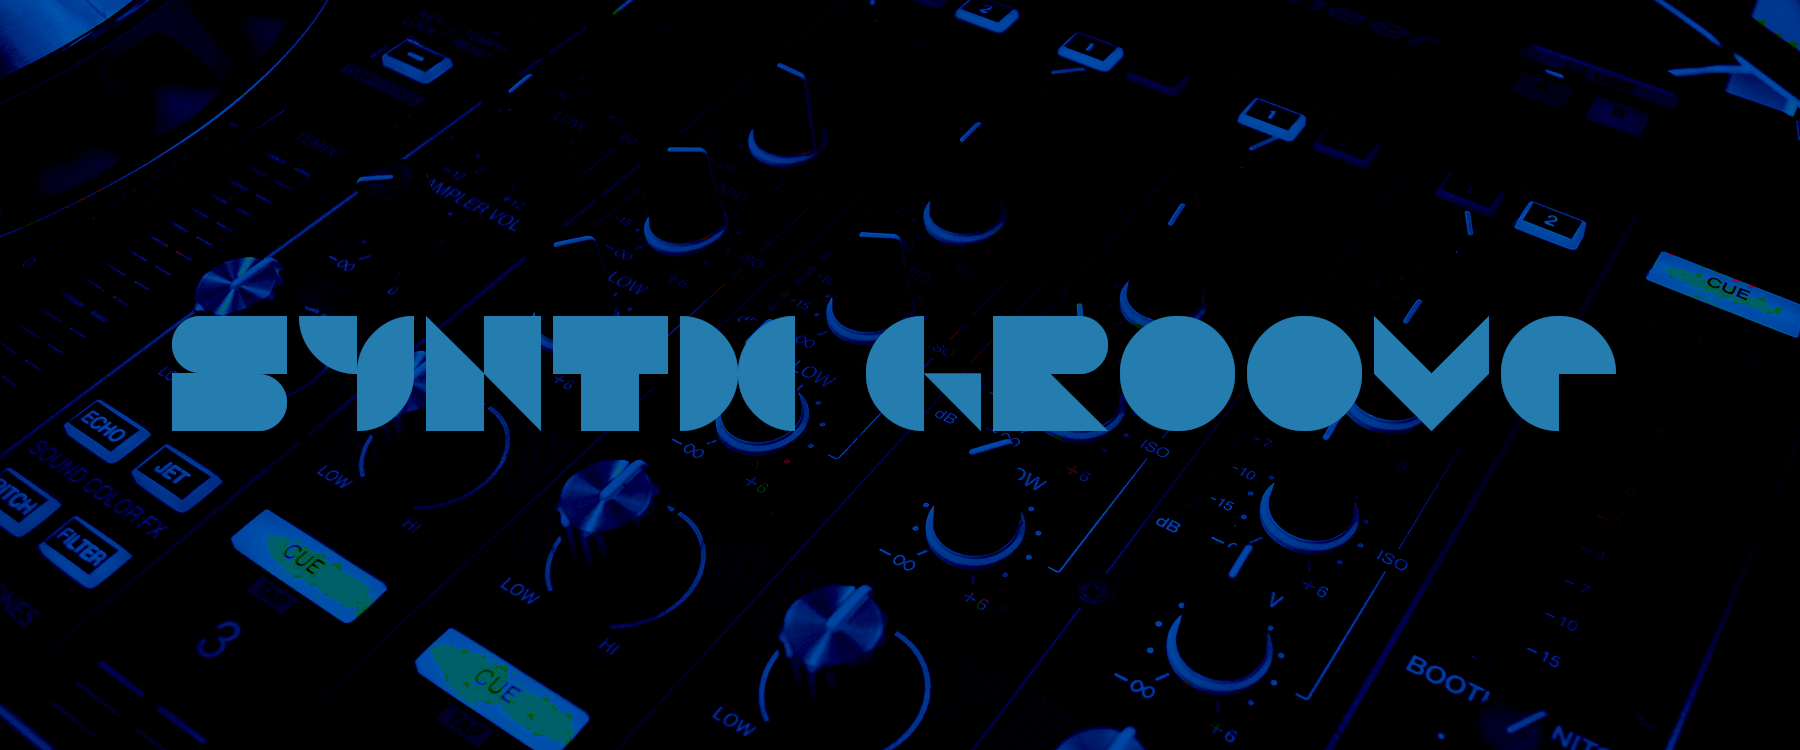 Synth Groove: Retro Font